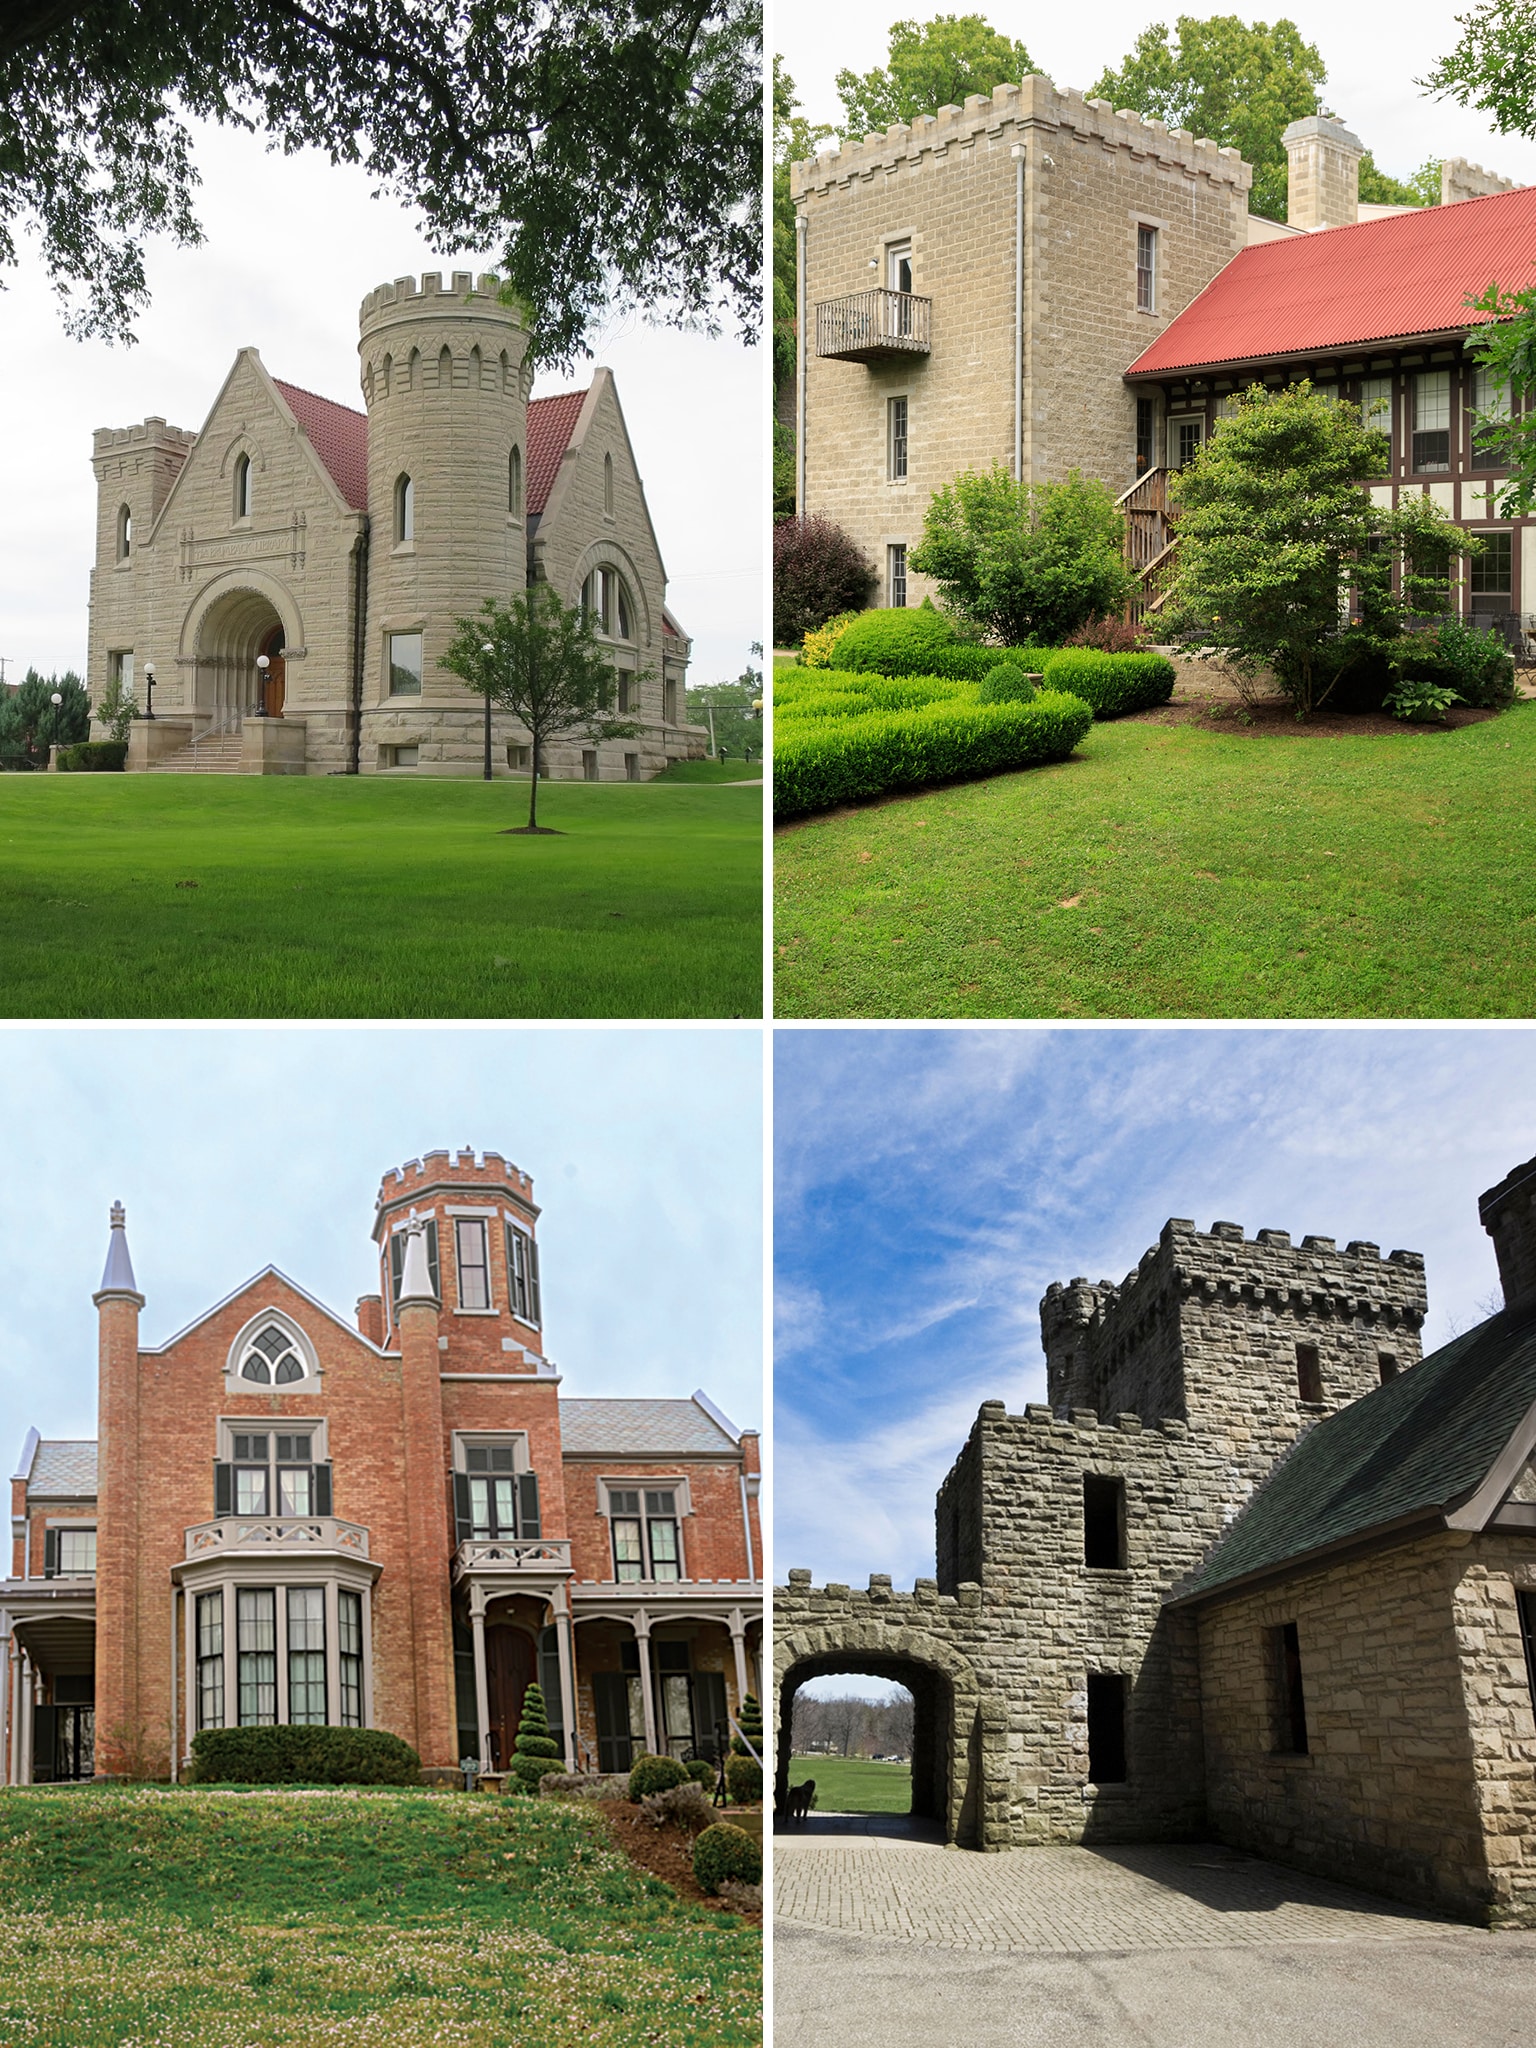 vertical image with 4 photos of castles in ohio: the brumback library, ravenwood castle, the marietta castle and squire's castle